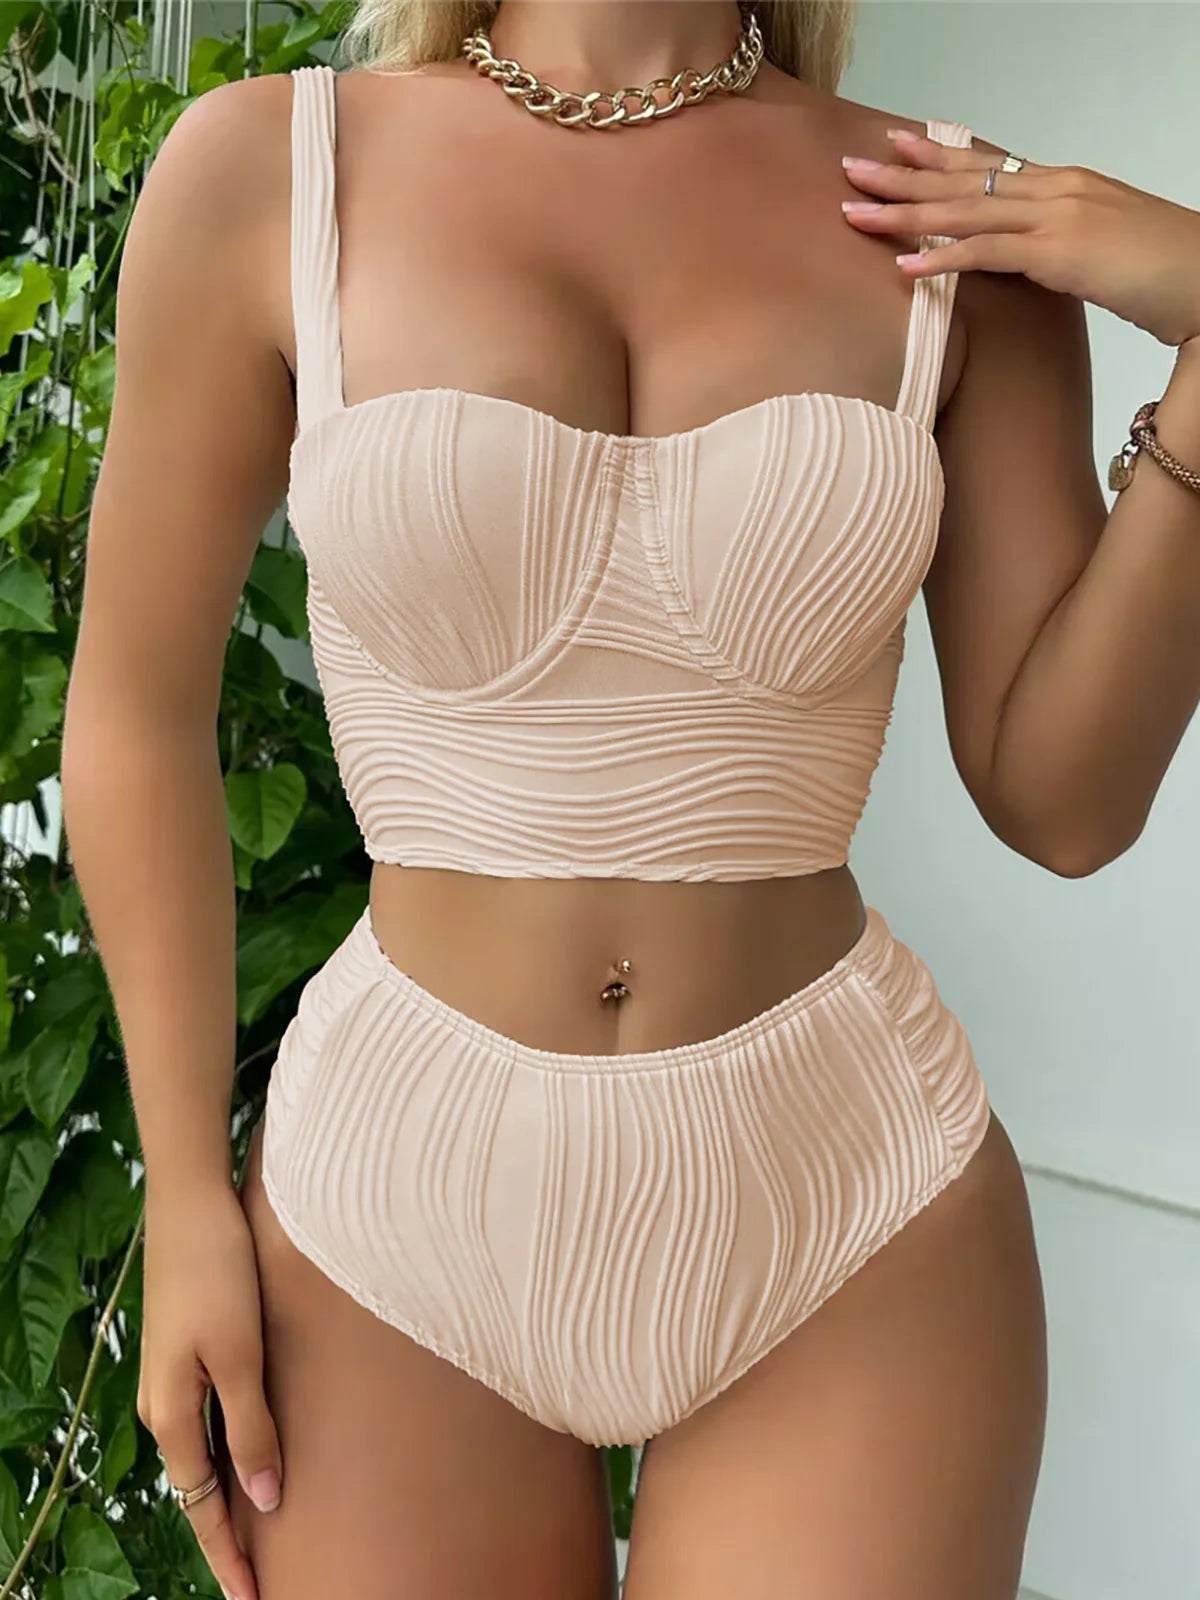 Wrinkled Underwired High Waist Bikini Set, Classic Two-Piece Swimwear, Made of Nylon and Spandex, Solid Pattern, Underwire Support, True to Size, Women's Bikini Set, Comes with Padding, Available in Sizes Small, Medium, Large, Colors Available: White, Beige, Black, Multicolor, Free Shipping.